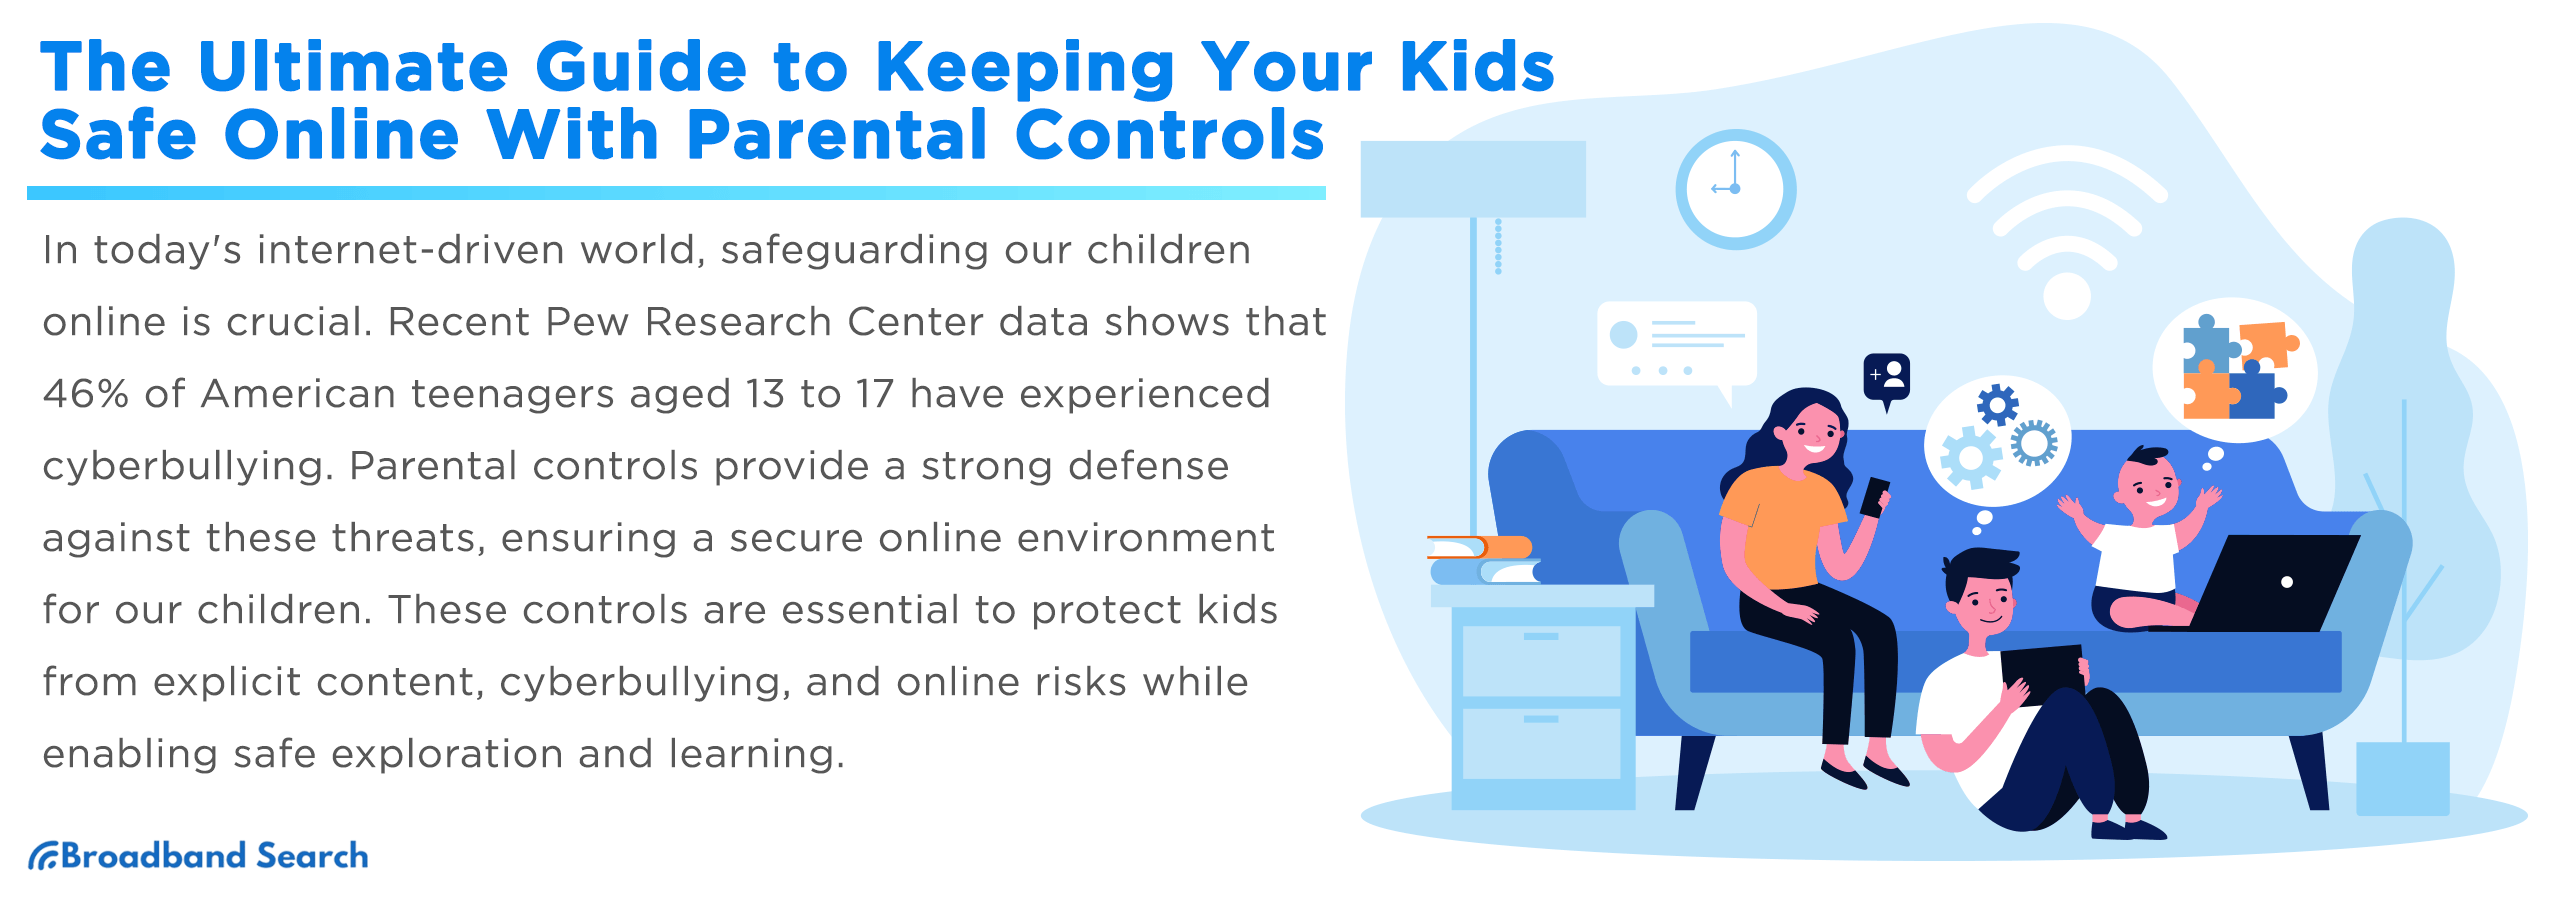 The Ultimate Guide to Keeping Your Kids Safe Online With Parental Controls